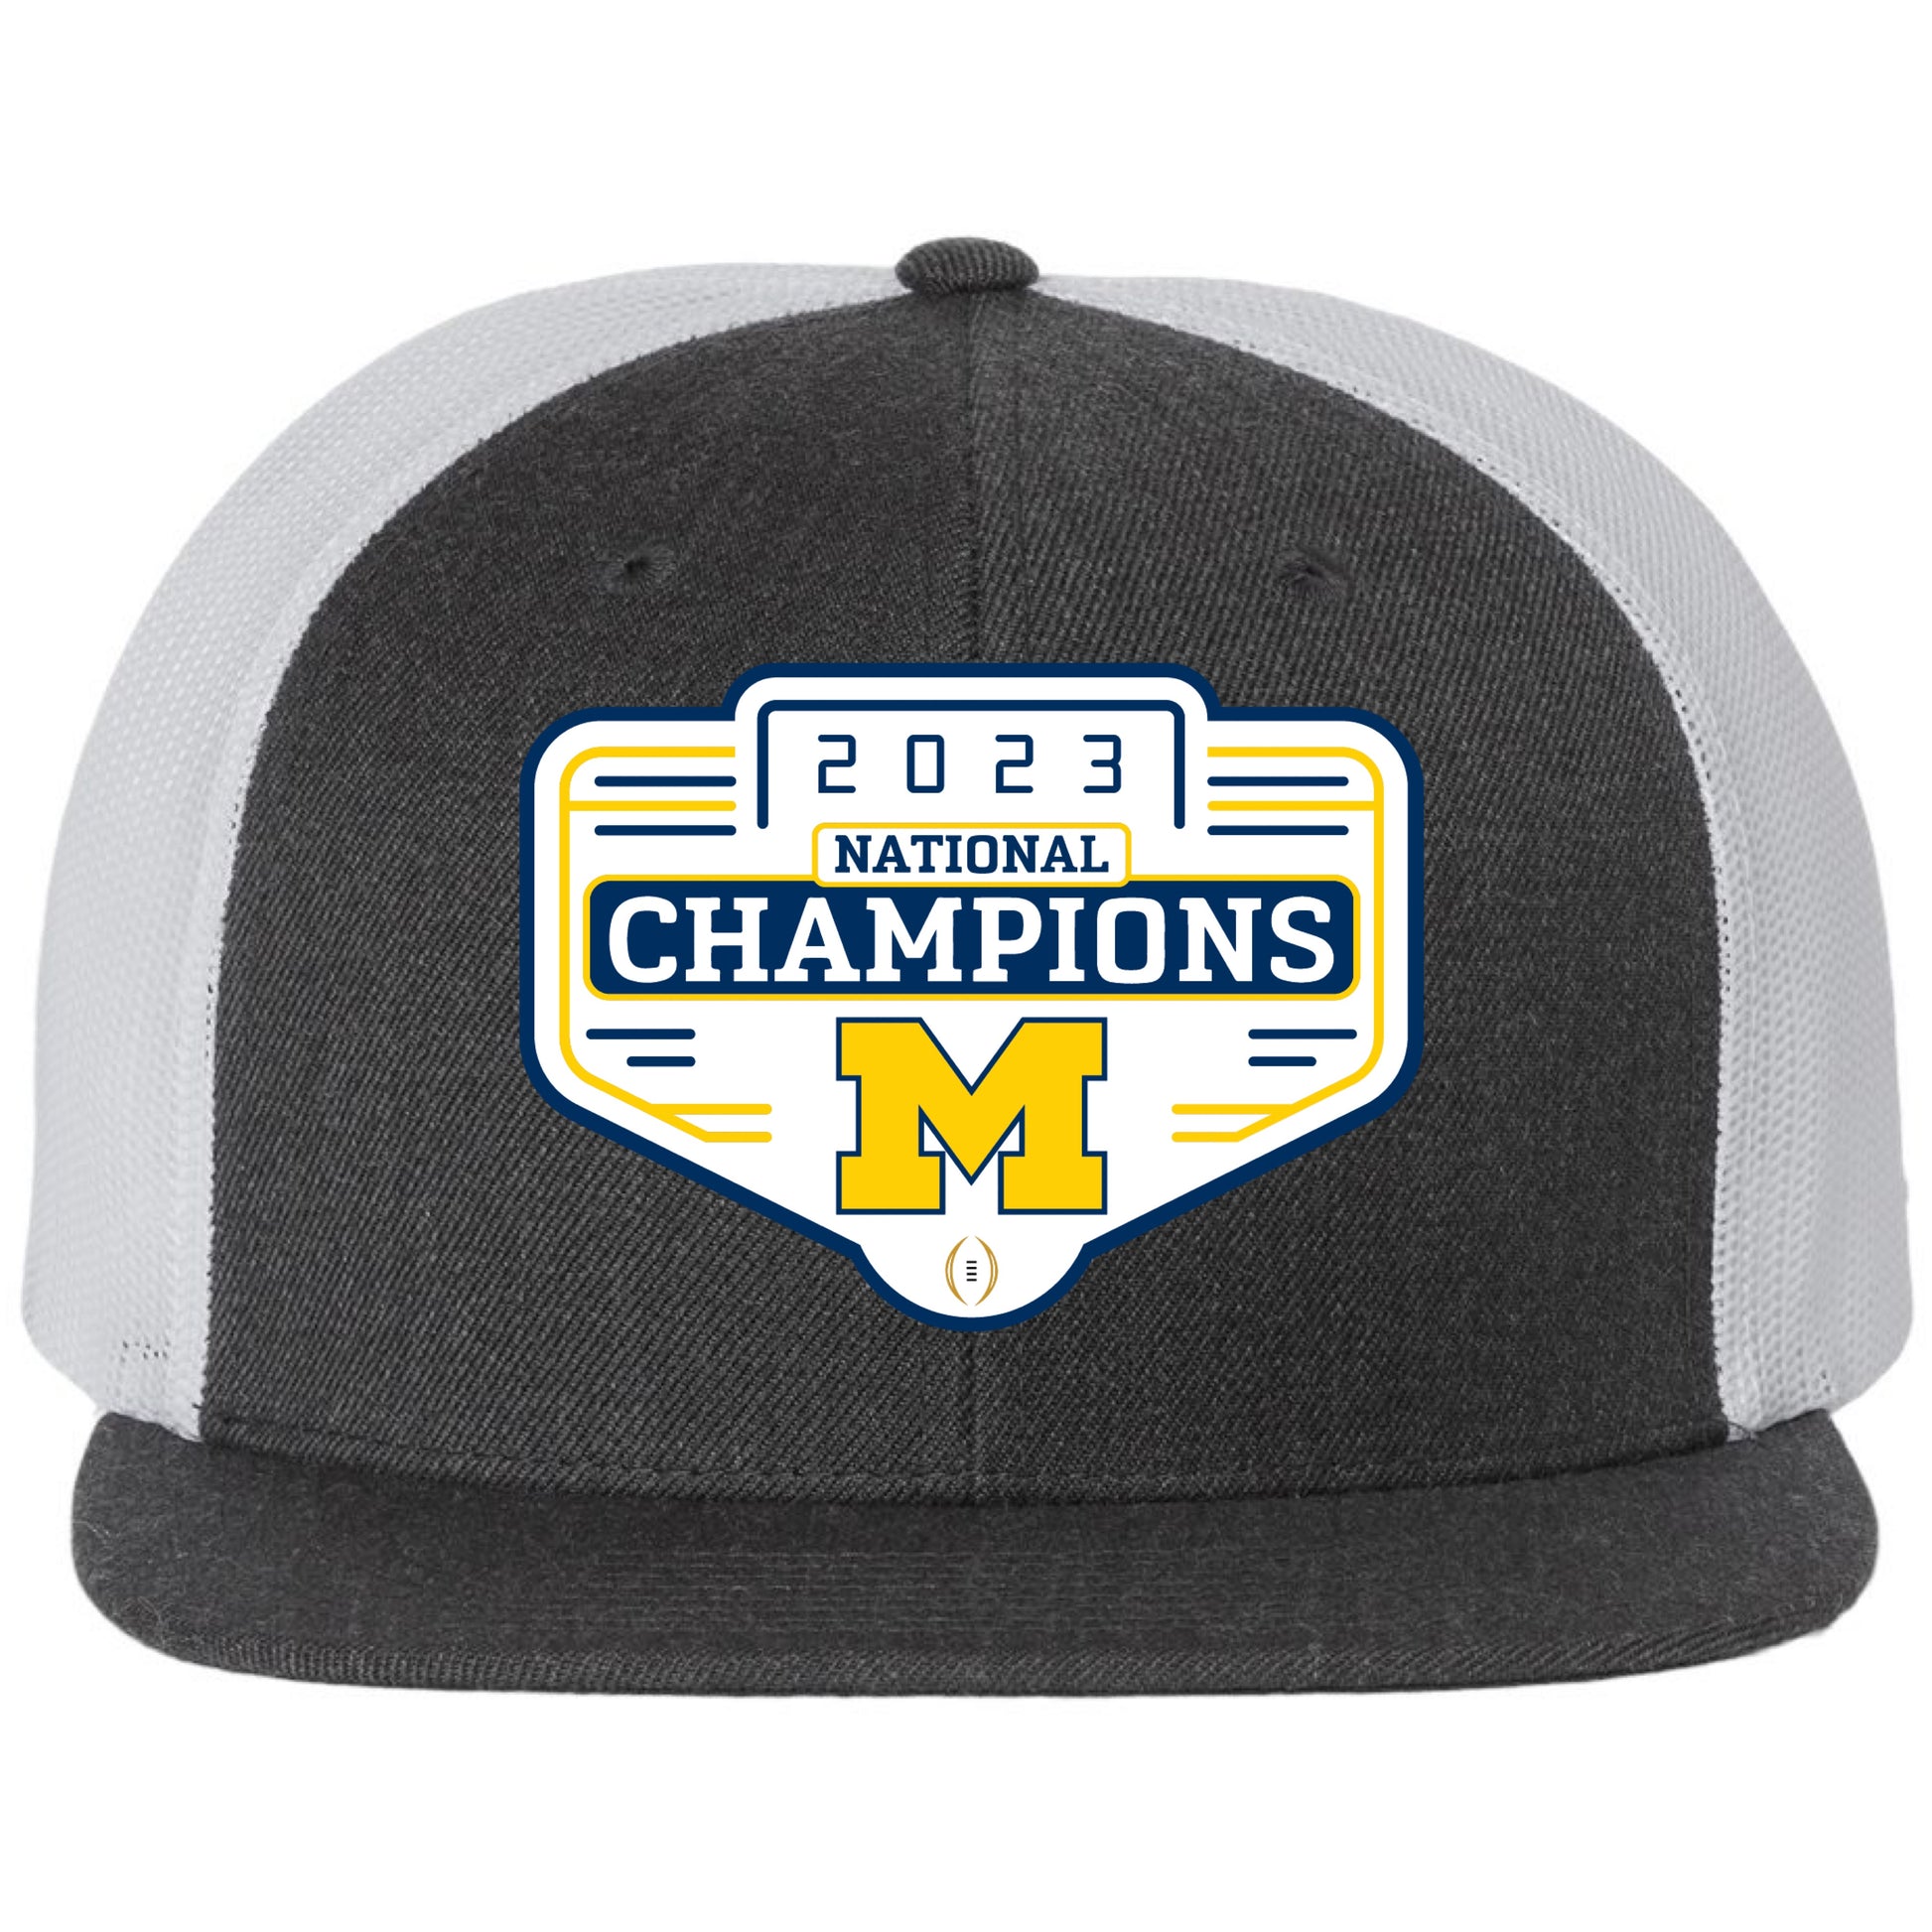 Michigan Wolverines 2023 National Champions Wool Blend Flat Bill Hat- Heather Charcoal/ White - Ten Gallon Hat Co.